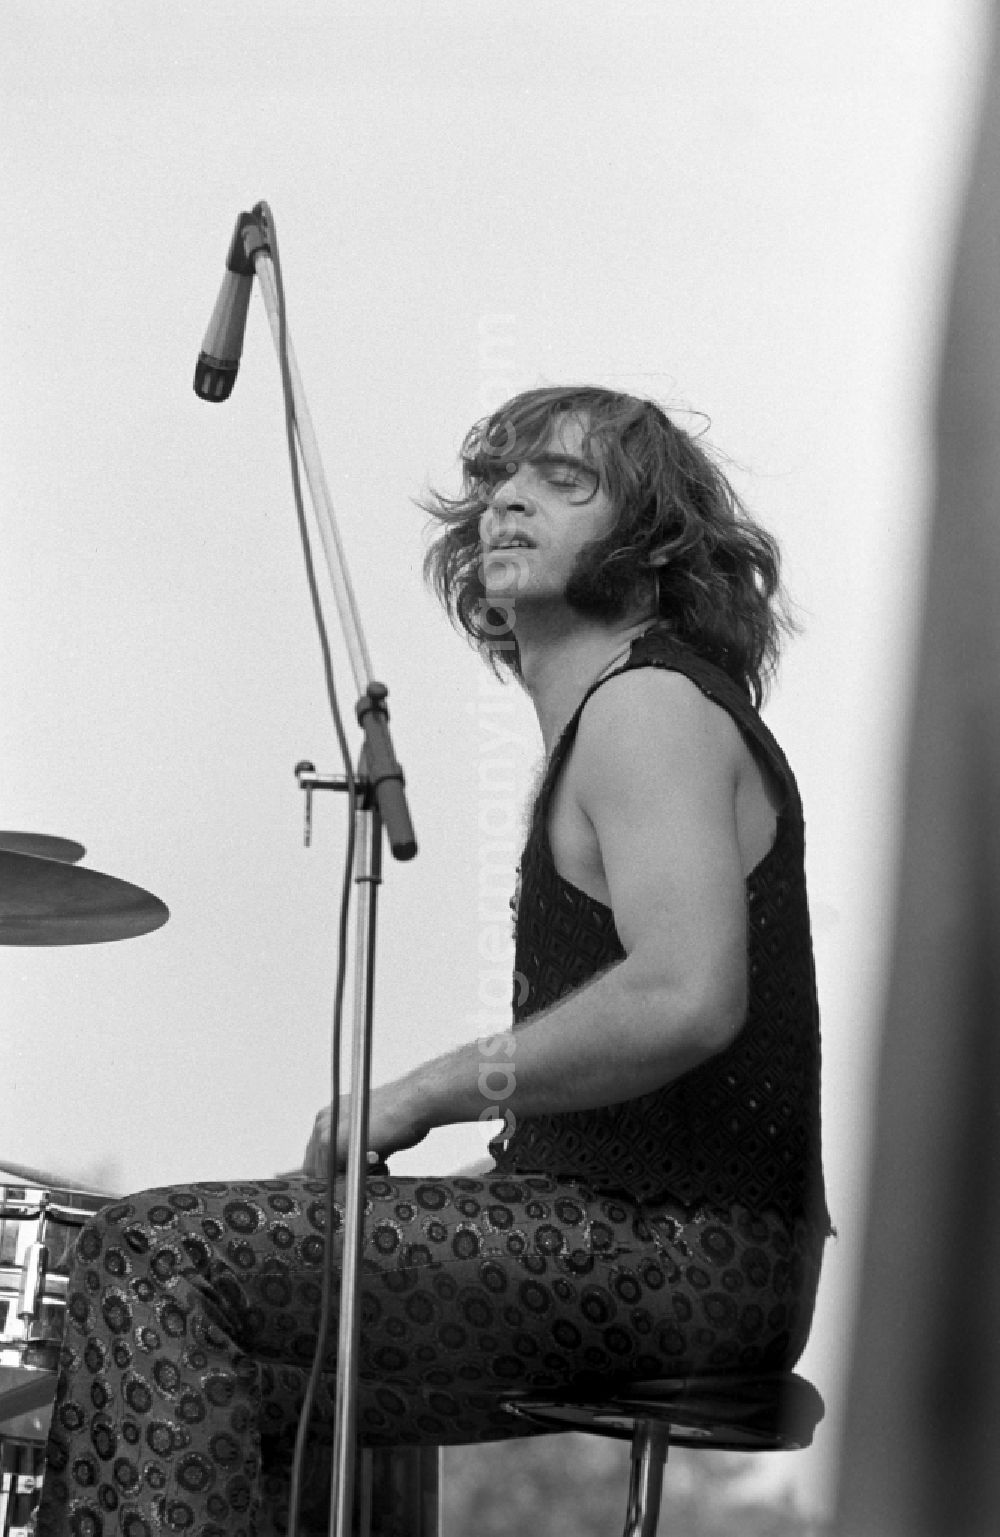 GDR photo archive: Wanzleben-Börde - Gunther Wosylus, drummer of the Puhdys in Wanzleben-Boerde, Saxony-Anhalt in the territory of the former GDR, German Democratic Republic